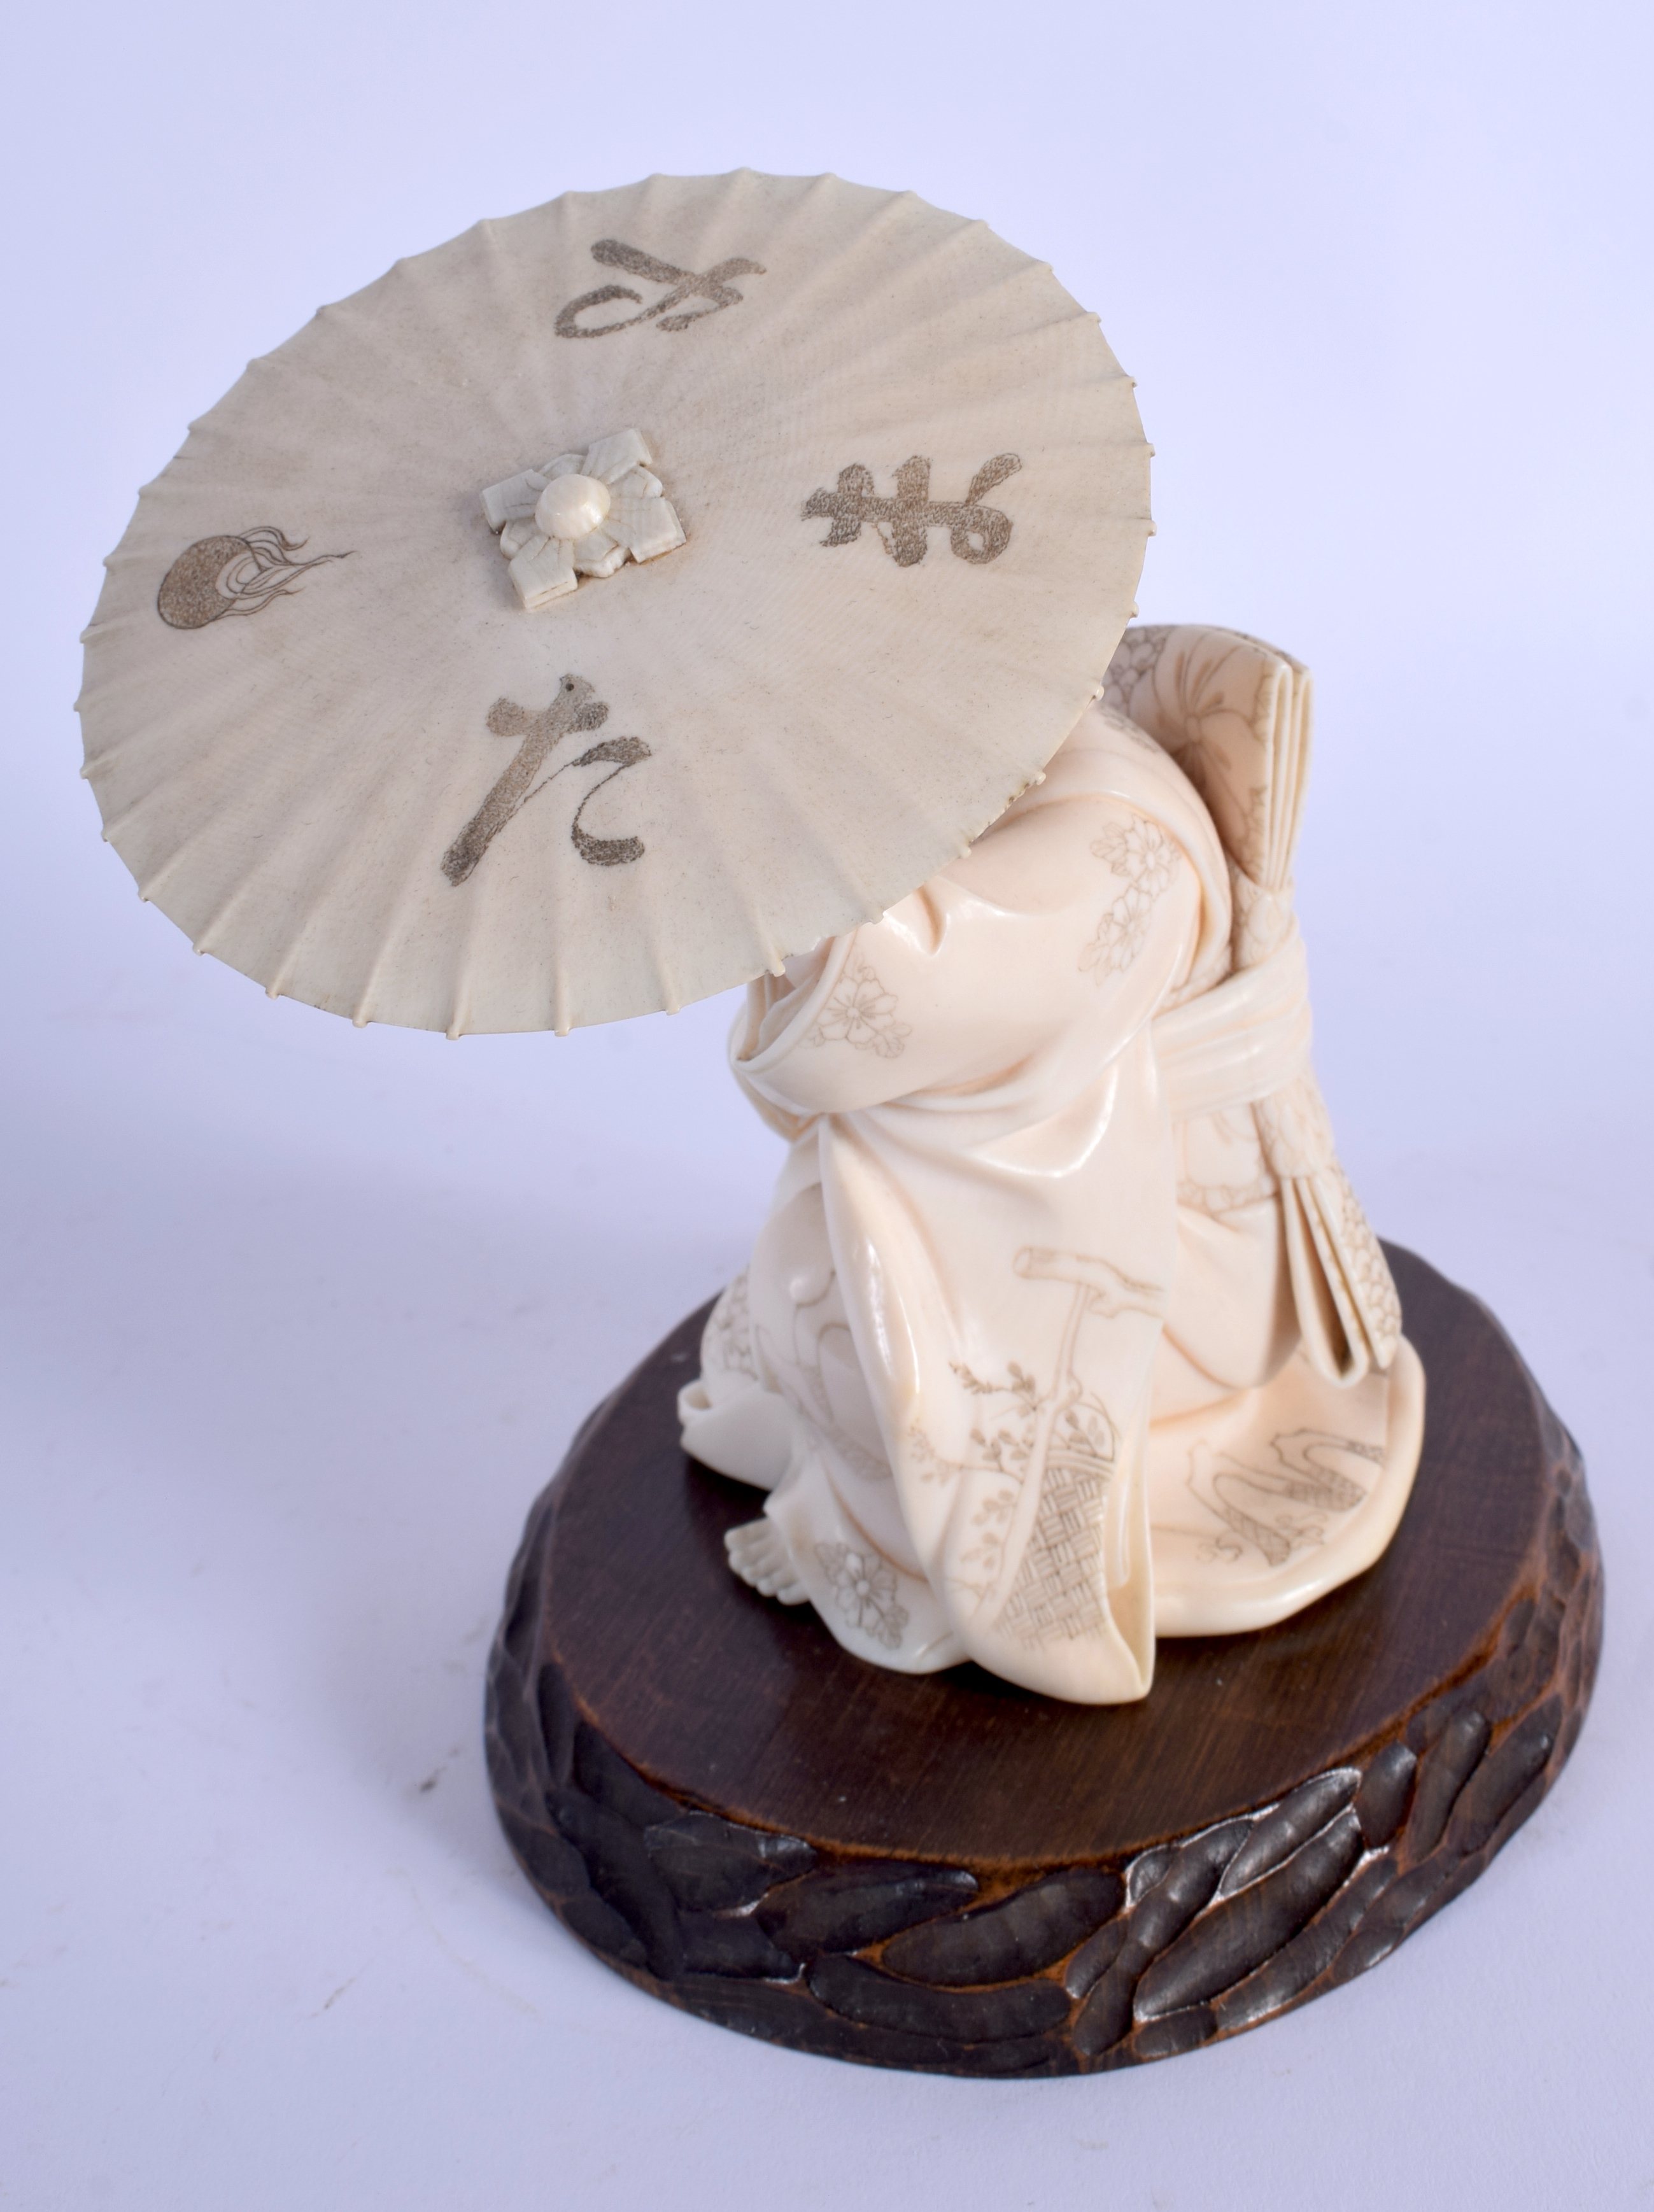 A FINE 19TH CENTURY JAPANESE MEIJI PERIOD CARVED IVORY OKIMONO modelled as a female sheltering under - Image 2 of 4